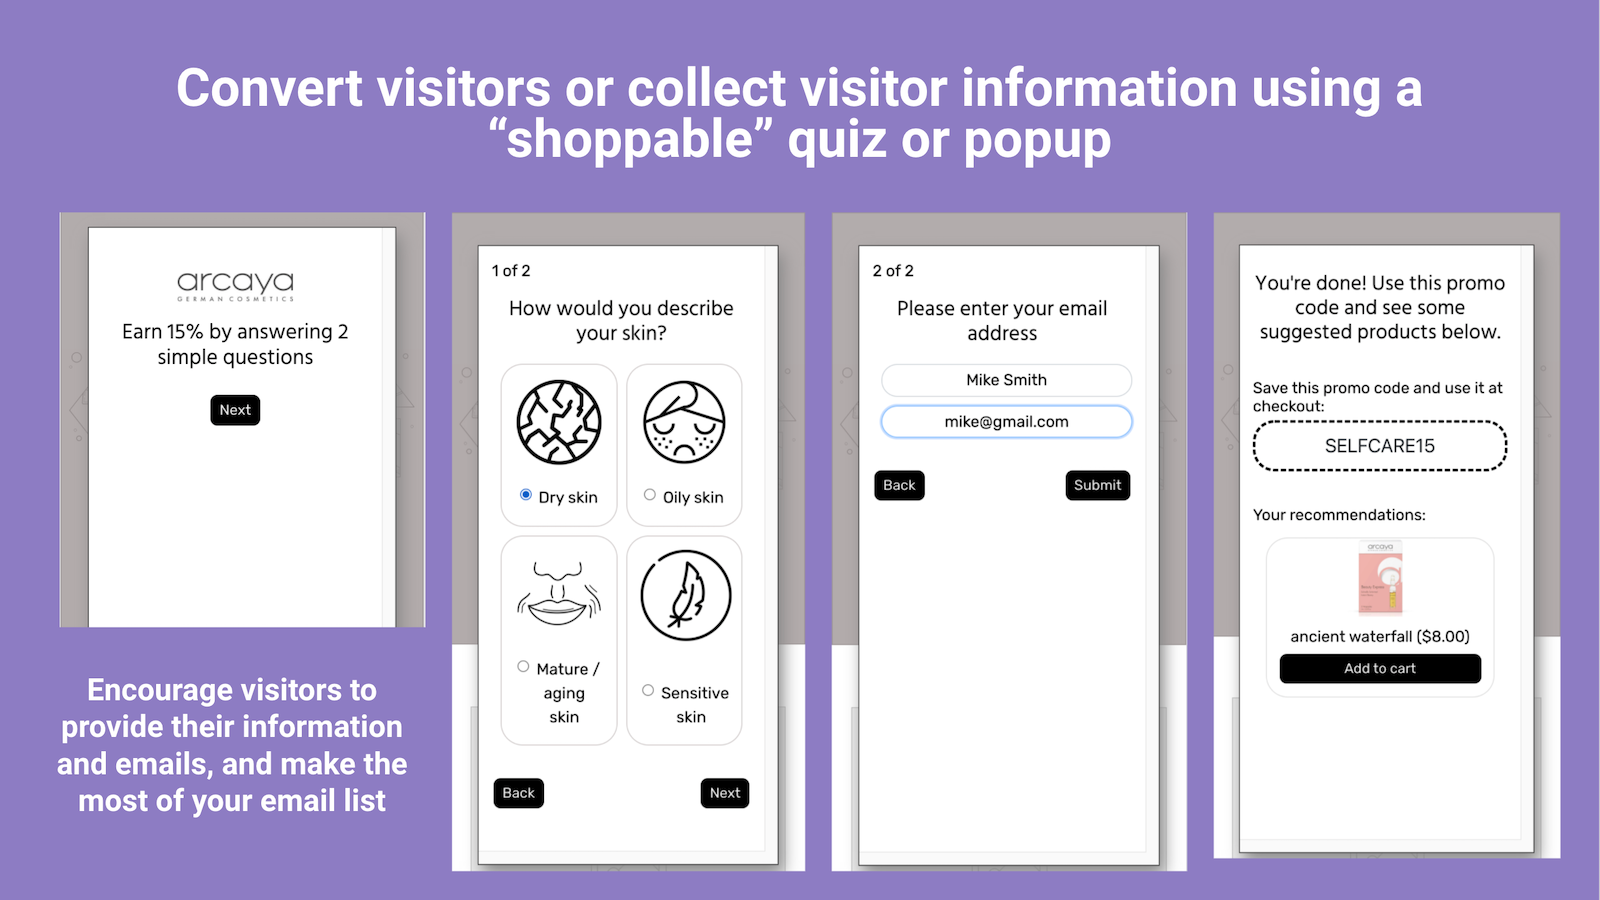 Benefits of a shoppable quiz or popup